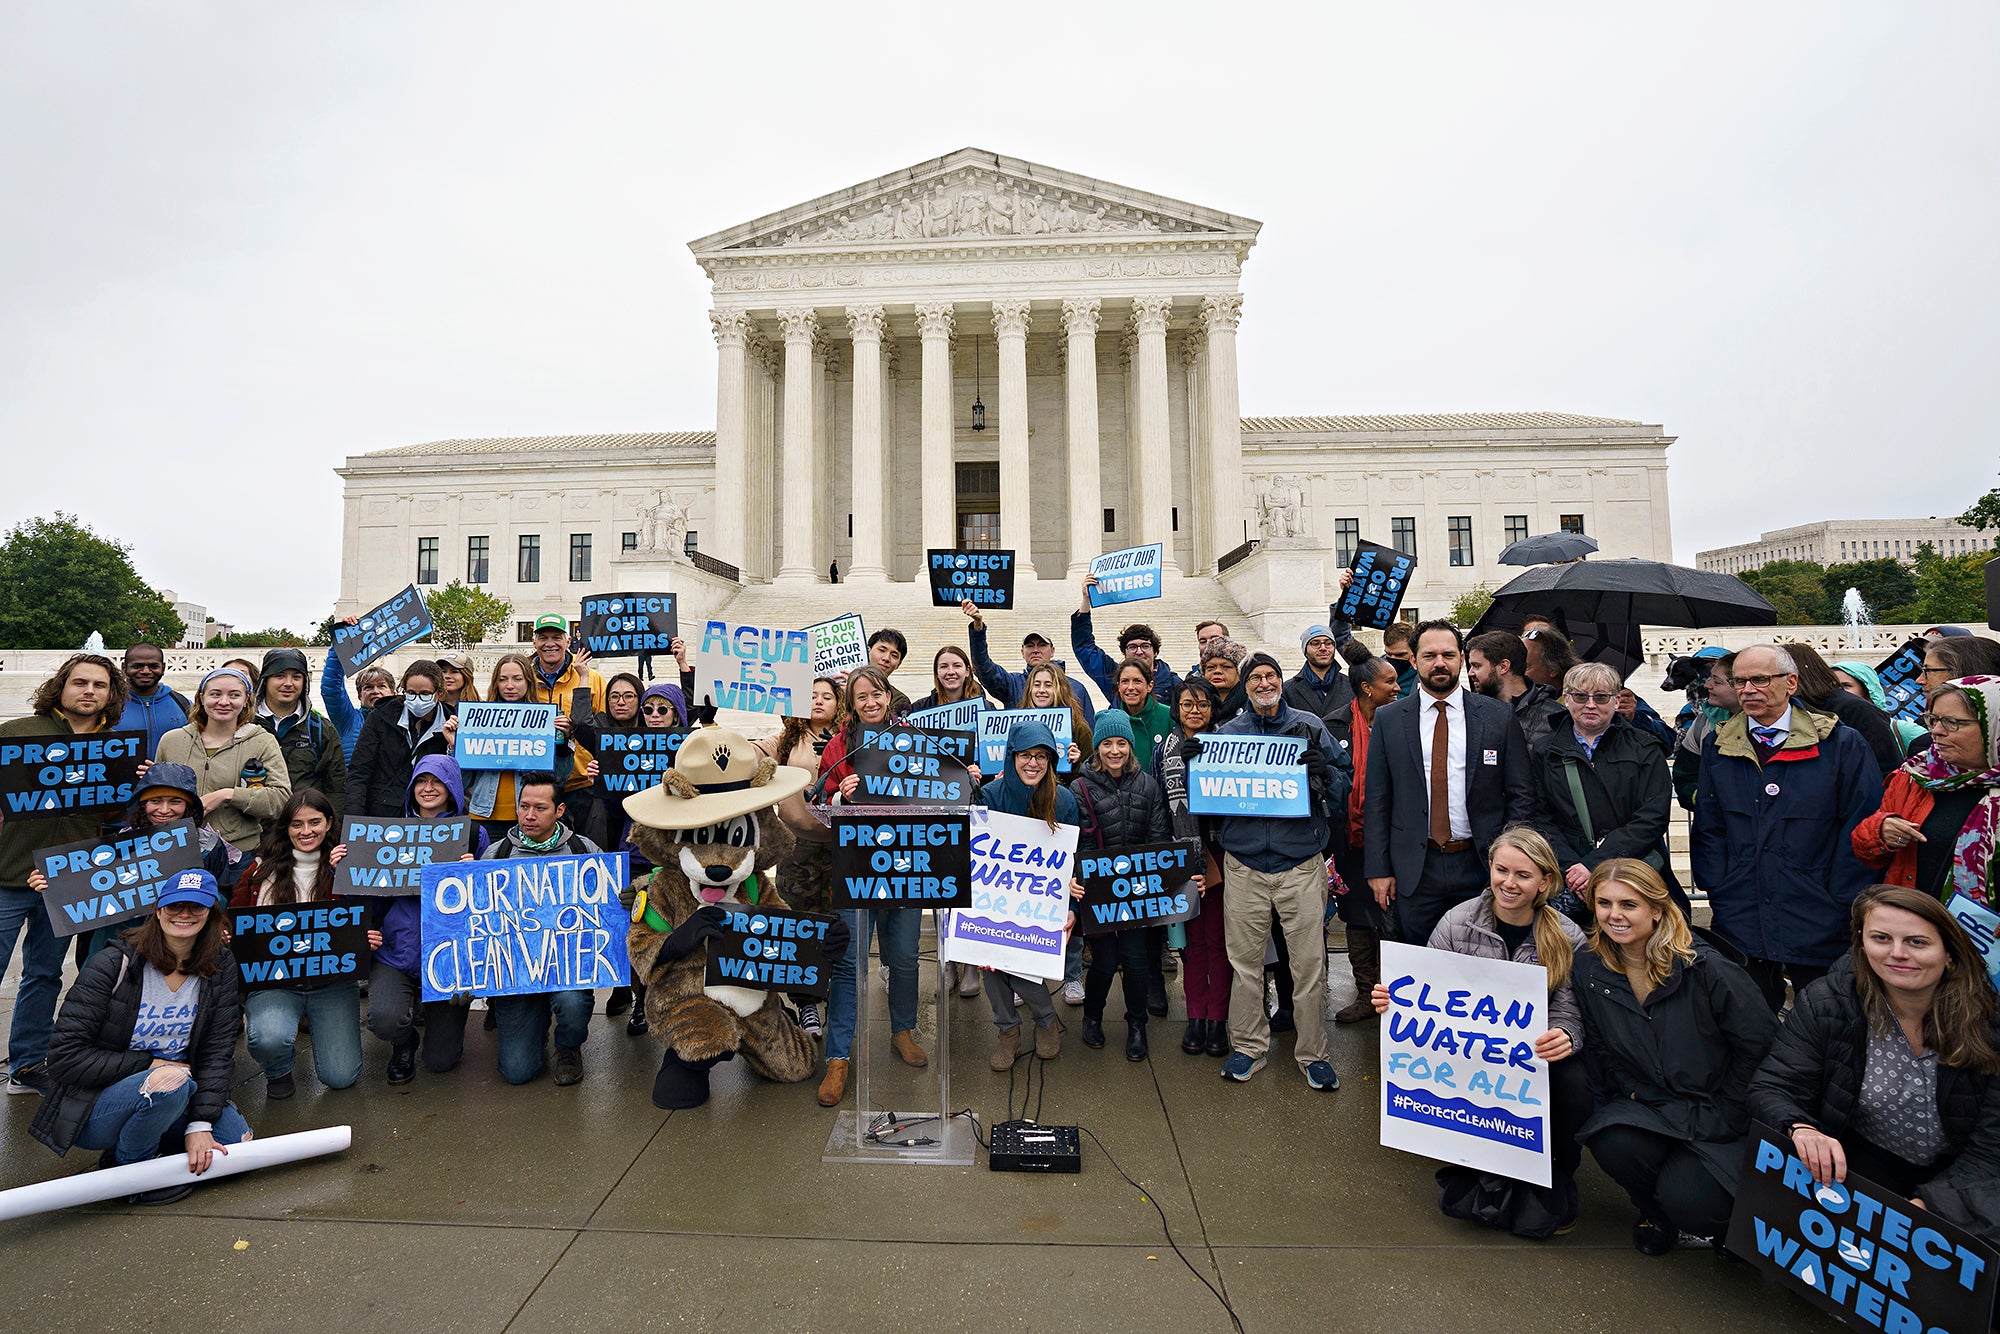 A large group of people hold signs for clean water in front of the Supreme Court Building.